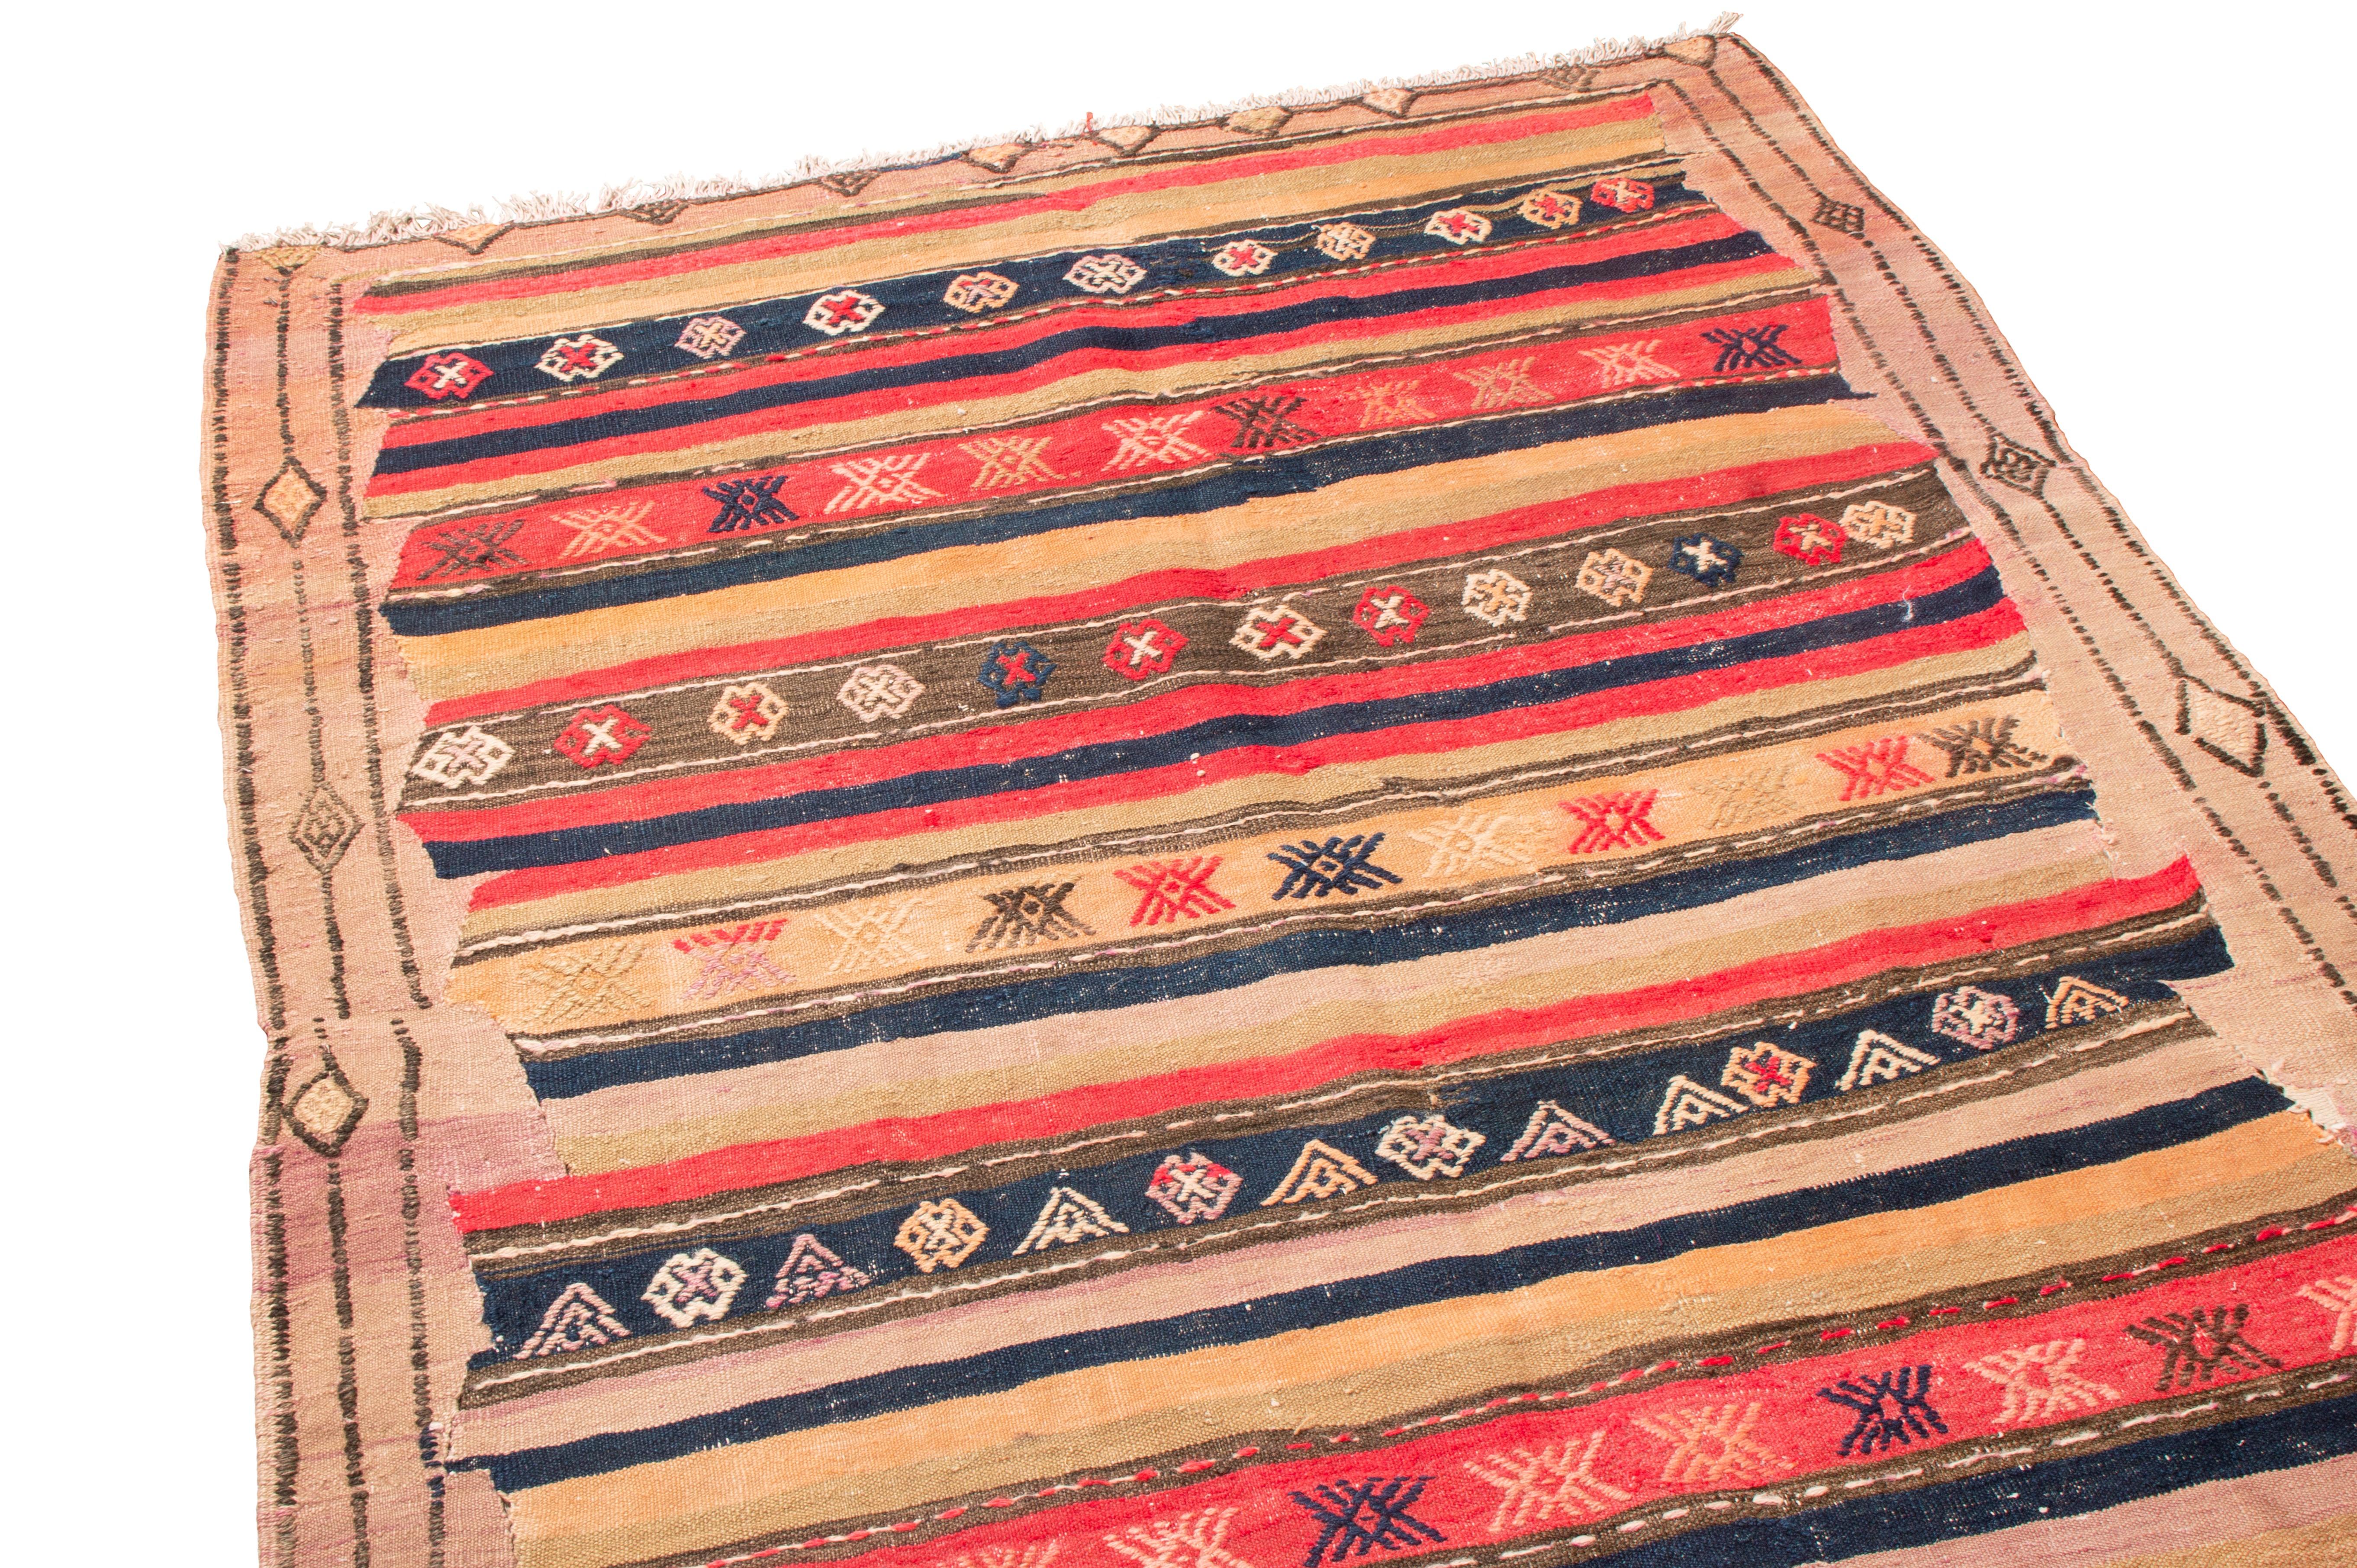 Originating from Turkey in 1920, this antique authentic Turkish wool kilim rug from Rug & Kilim features a wrapping border of symbolic diamonds and a field design employing rows of stars and protective medallions. Flat woven in durable, tight wool,